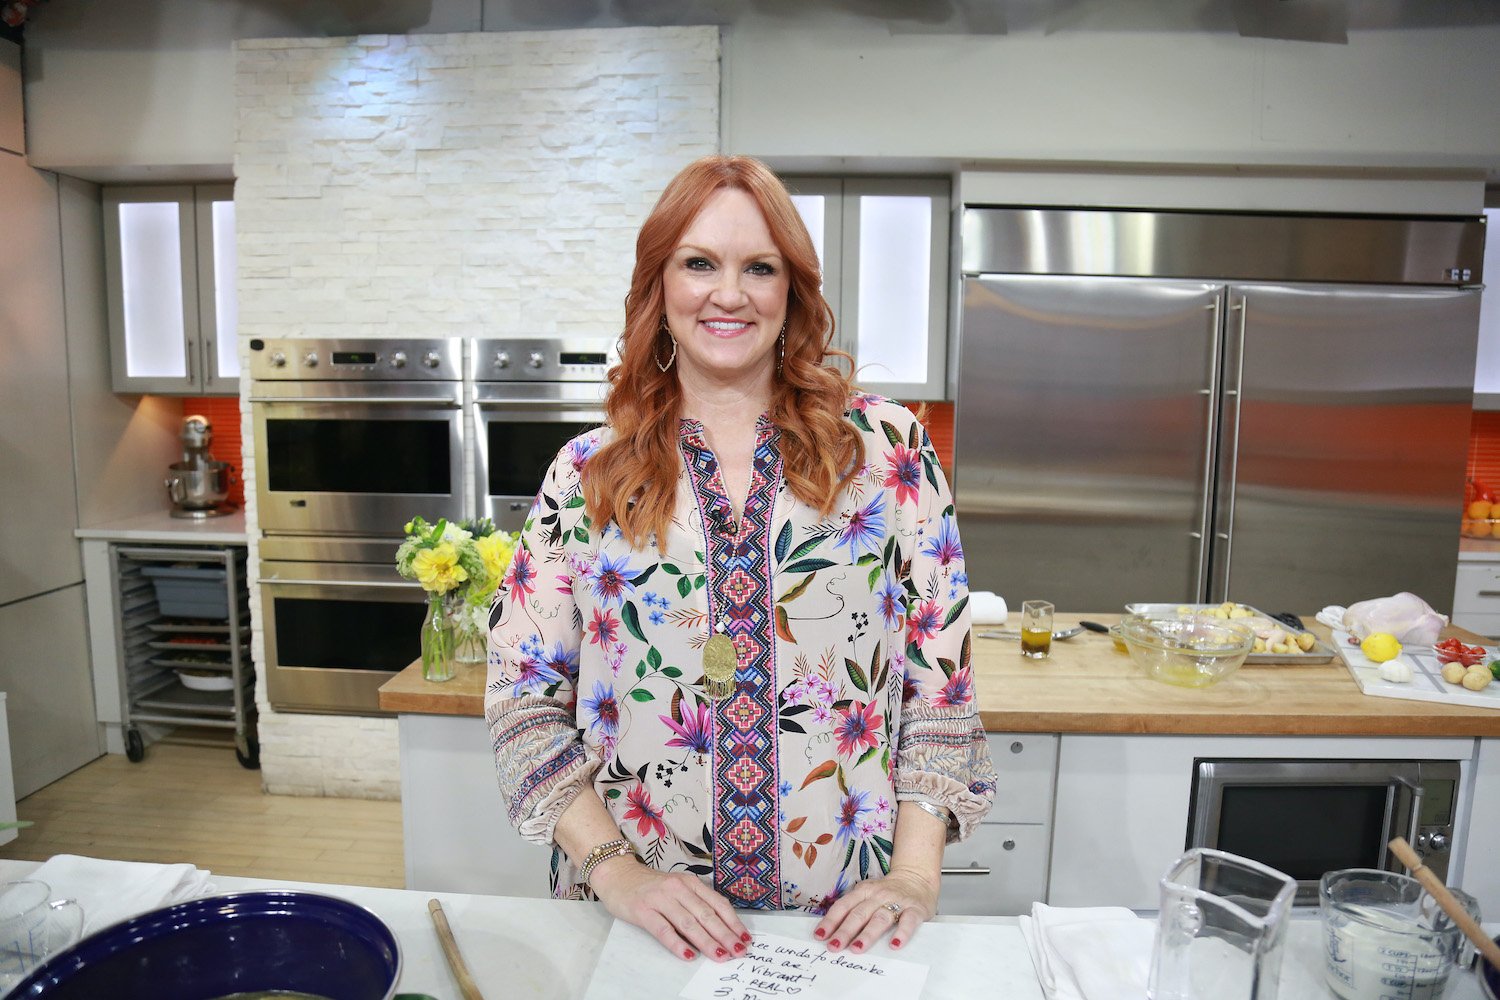 'The Pioneer Woman' Ree Drummond on the Today show in 2019